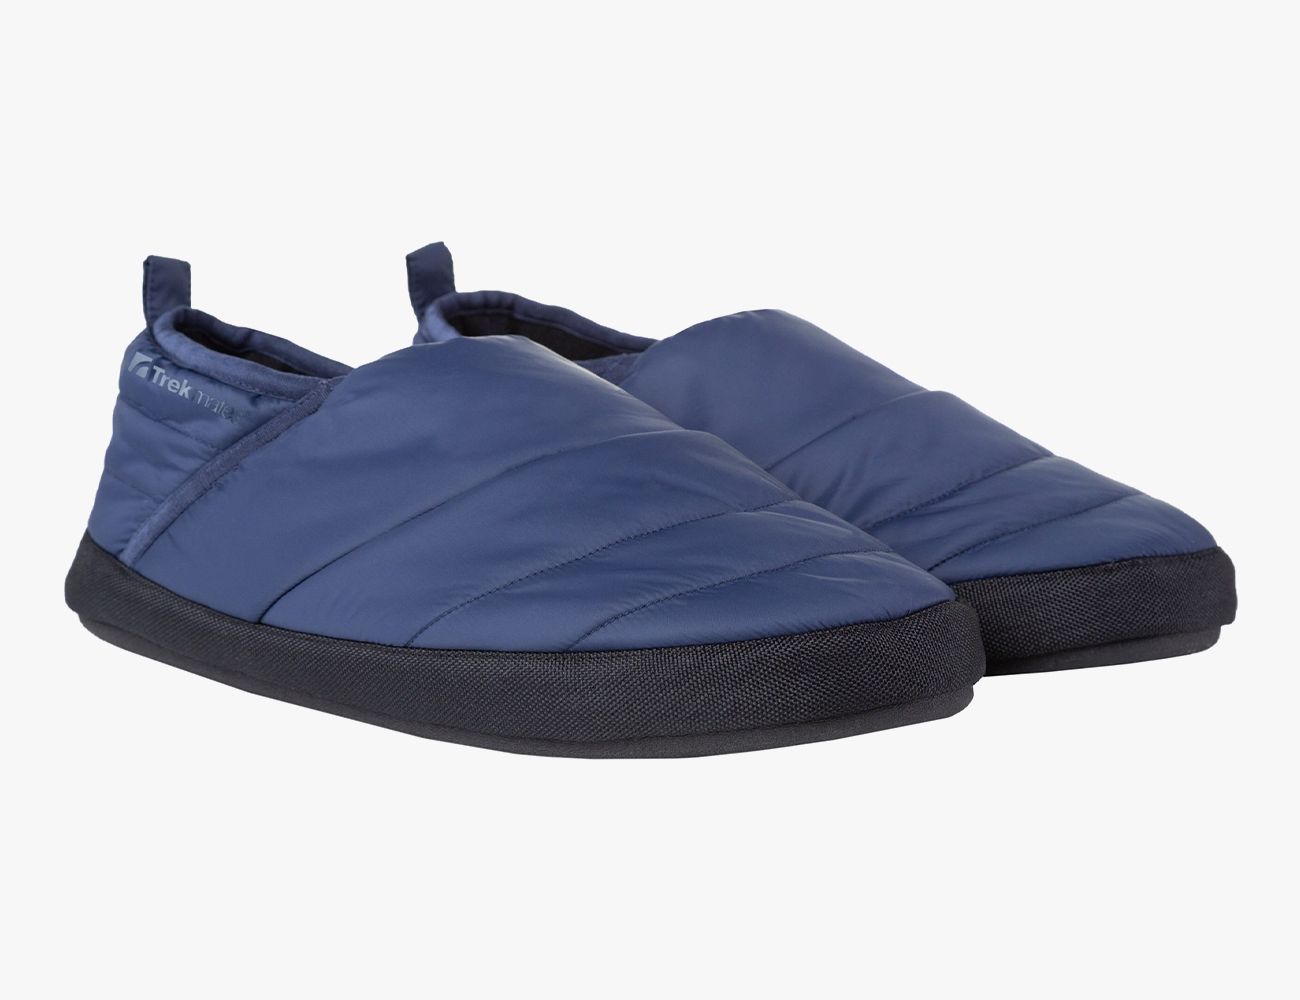 Insulated Slippers | REI Co-op